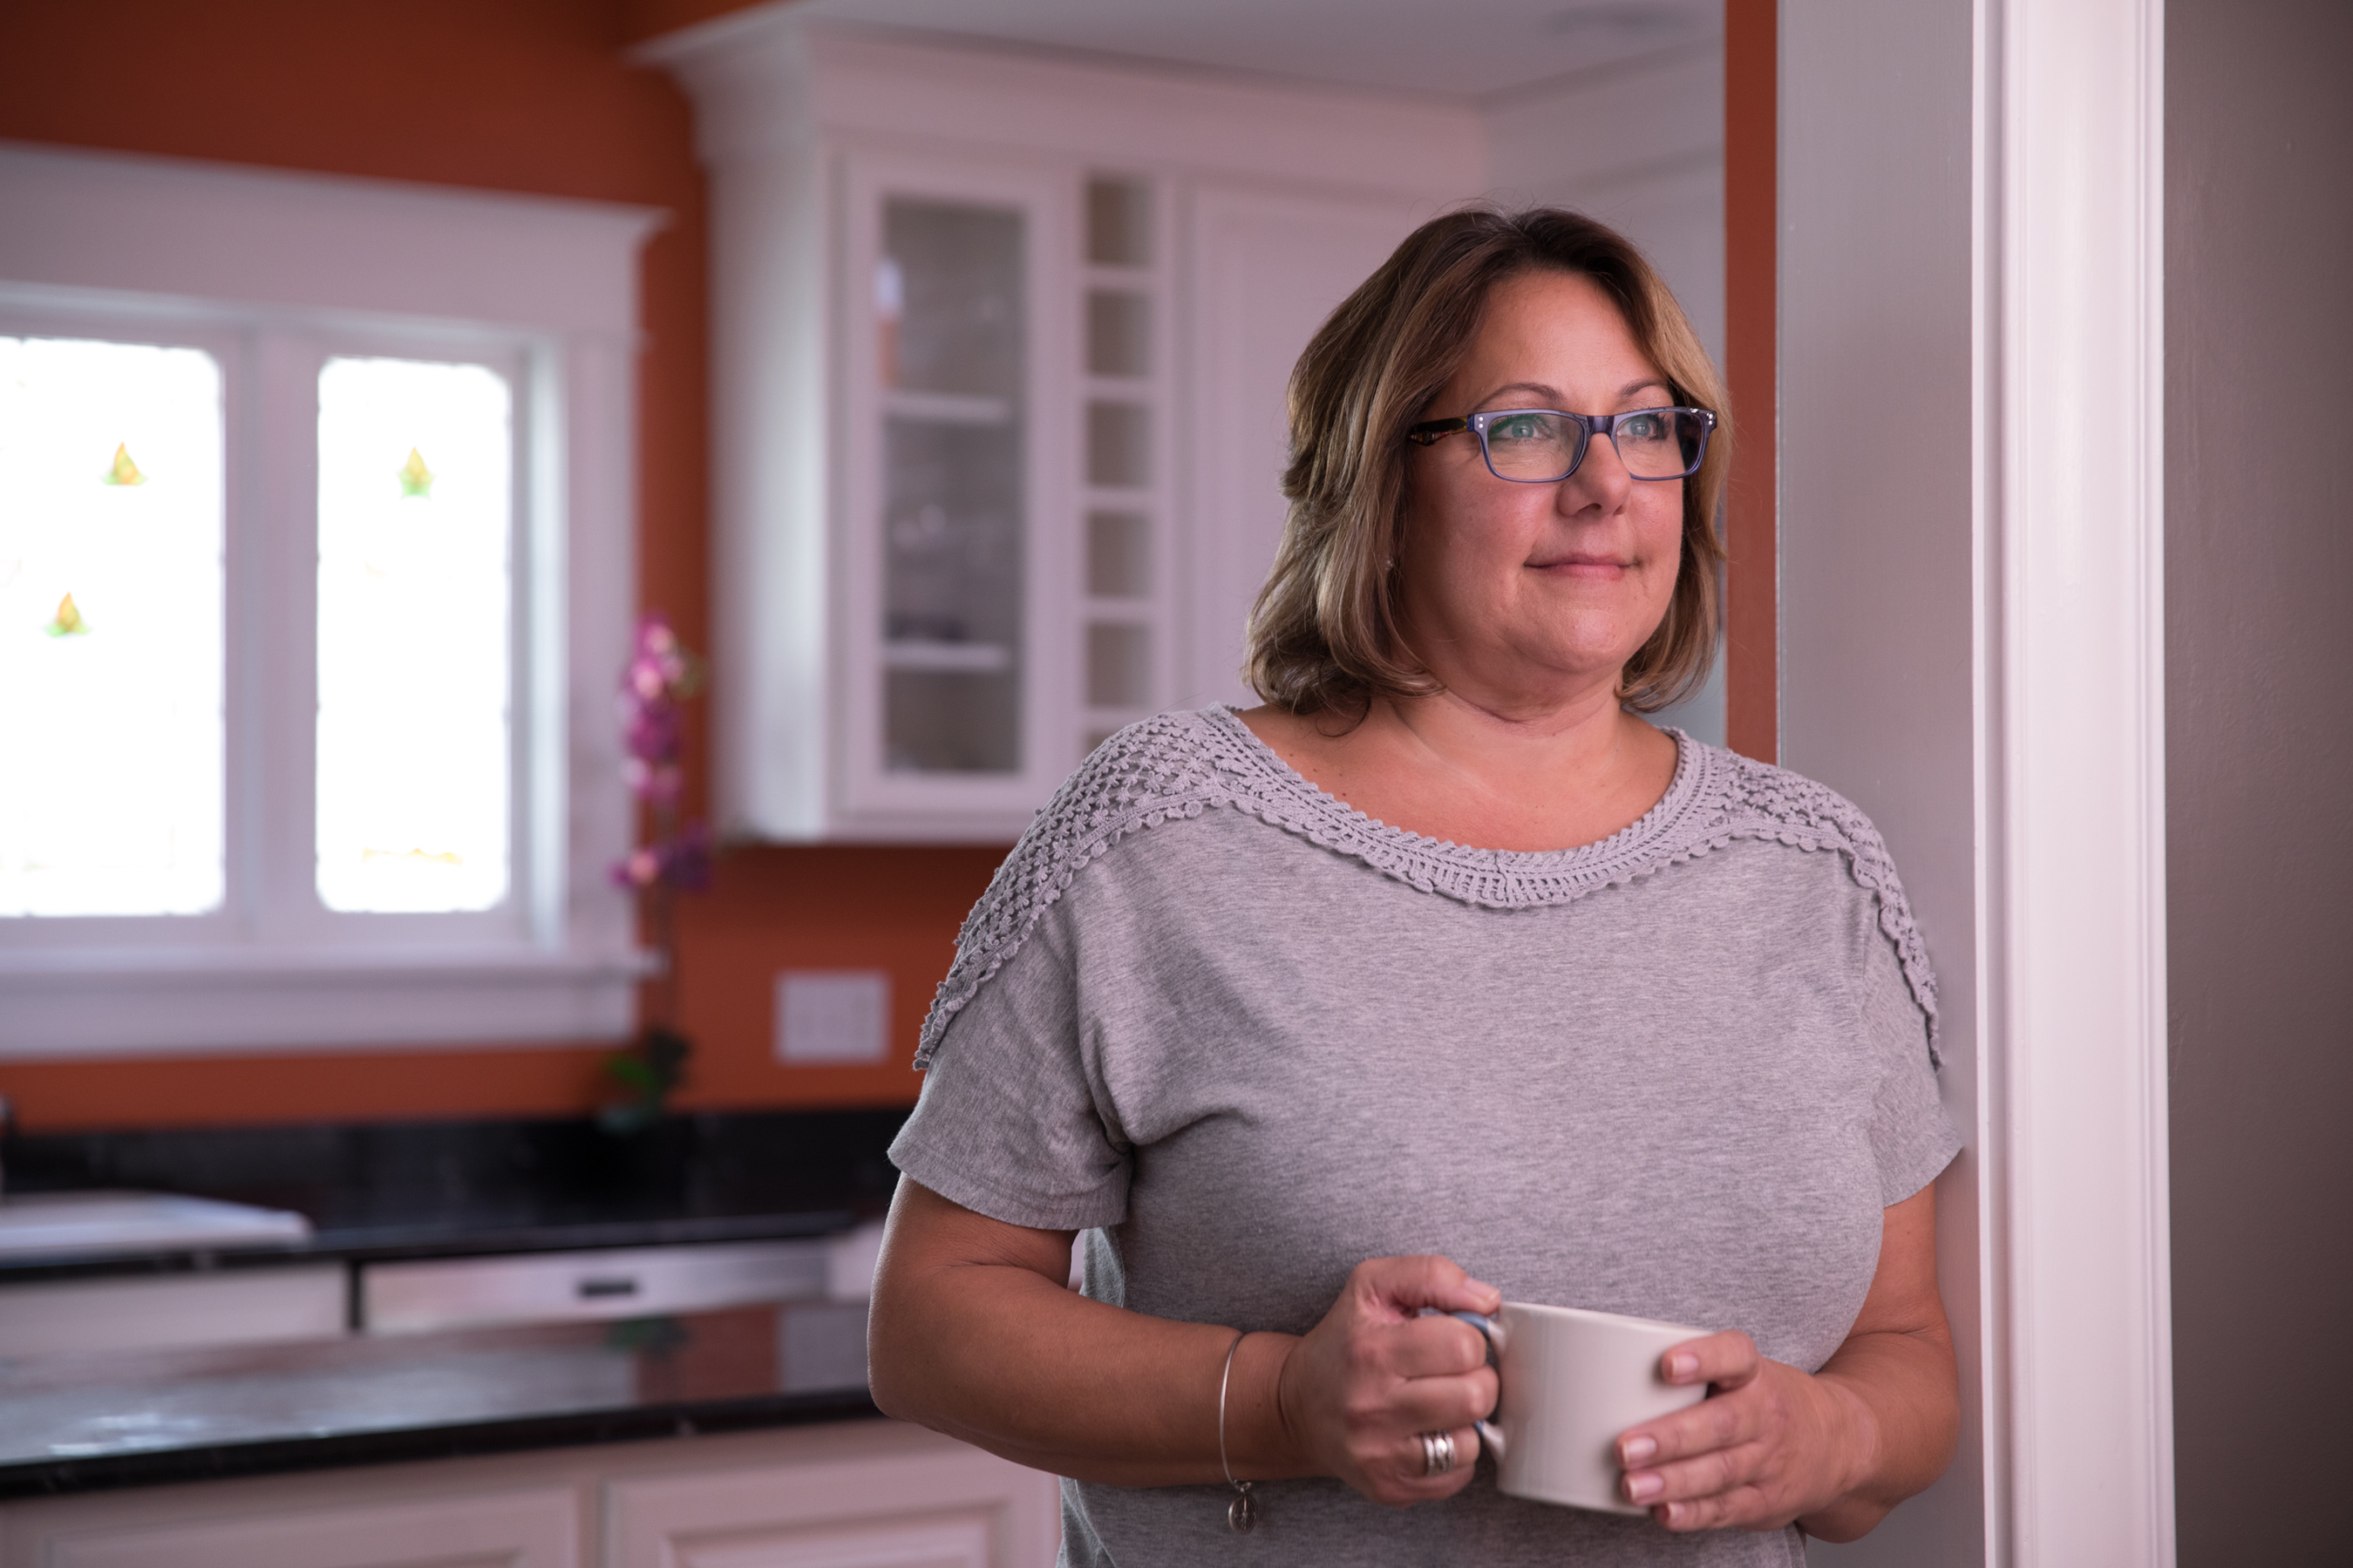 For people living with asthma and diabetes, the flu can be particularly dangerous ? as Lisa knows all too well. Last year, flu struck her hard, and she ended up in the intensive care unit.